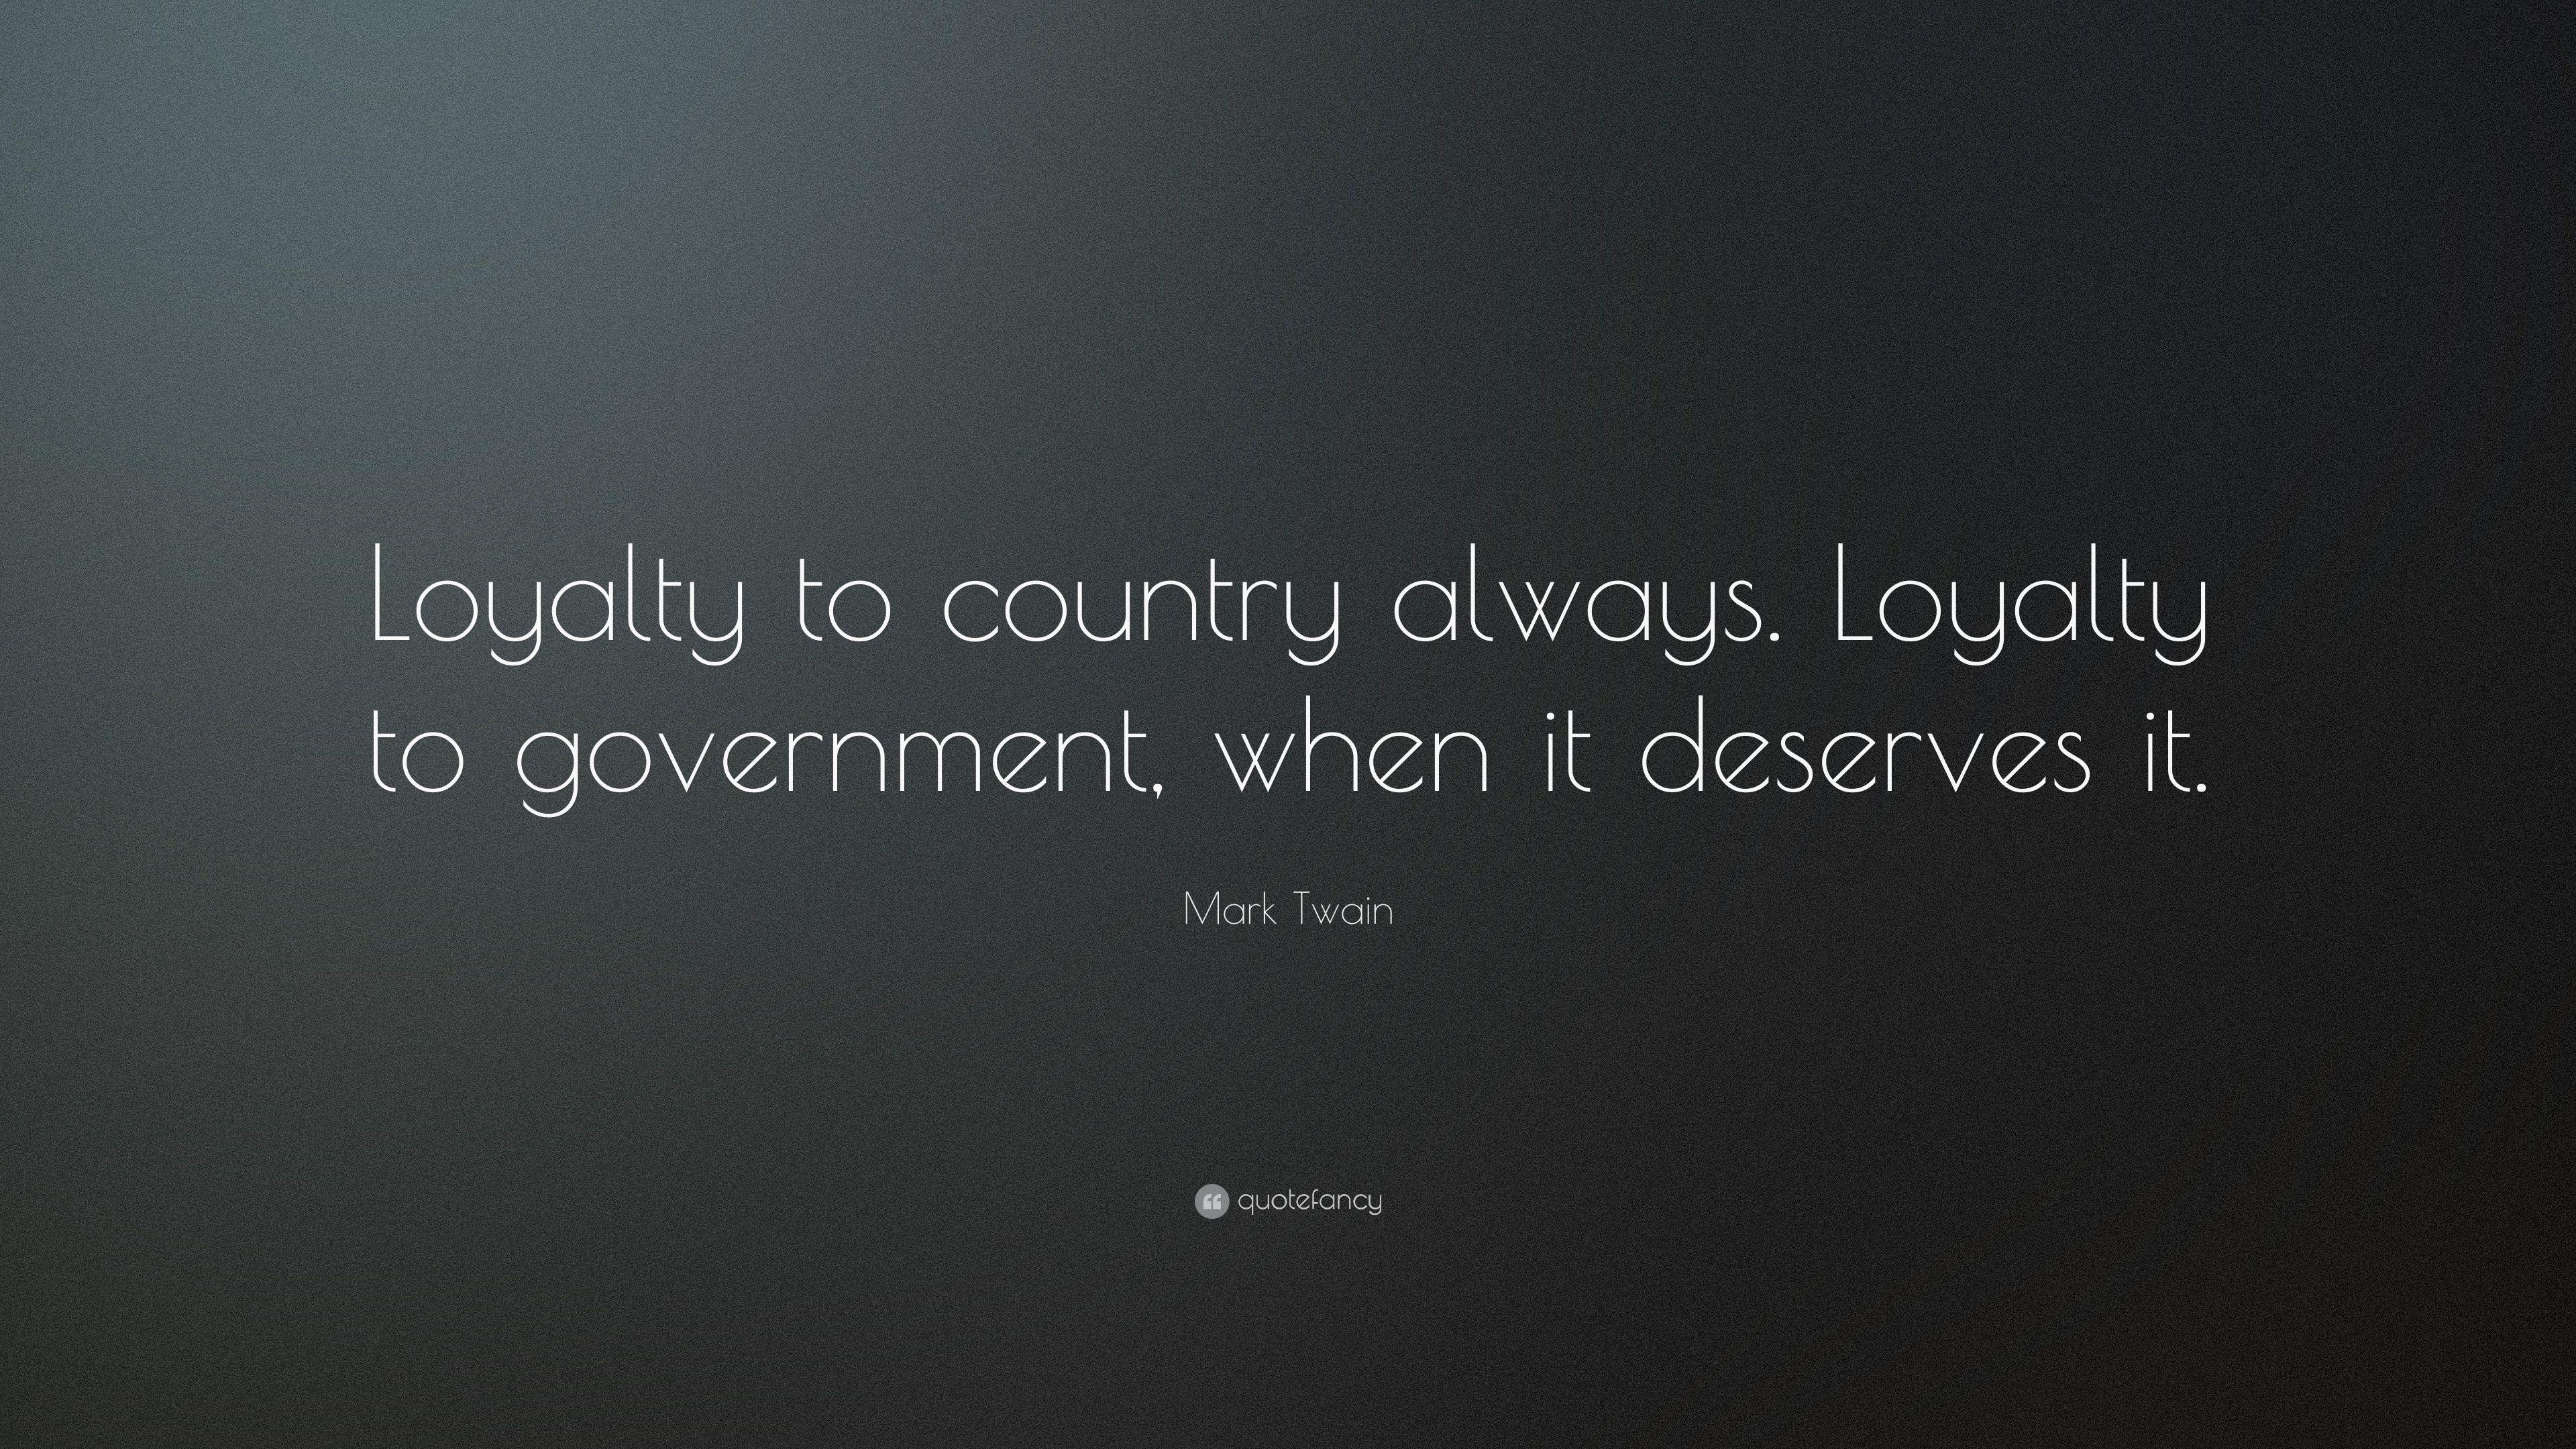 Mark Twain Quote: “Loyalty to country always. Loyalty to government